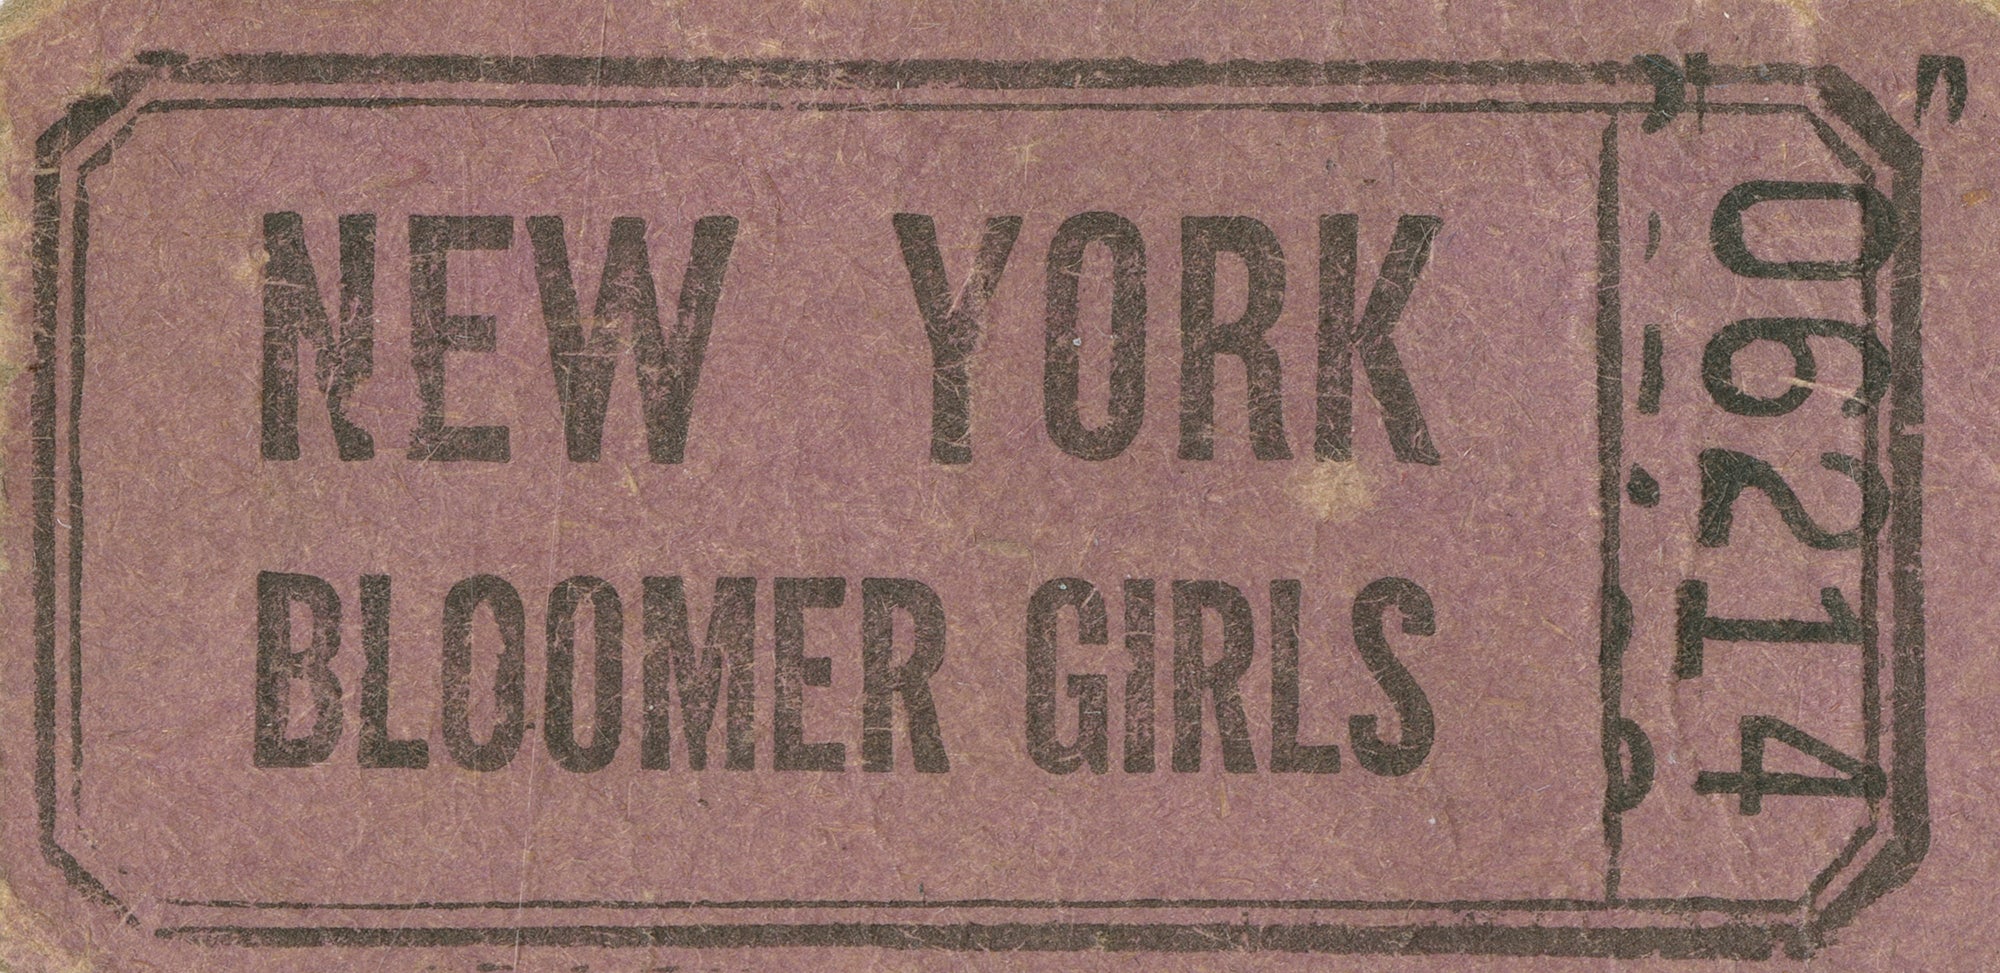 Artifact collection of former Bloomer Girls star preserved at the Hall of Fame